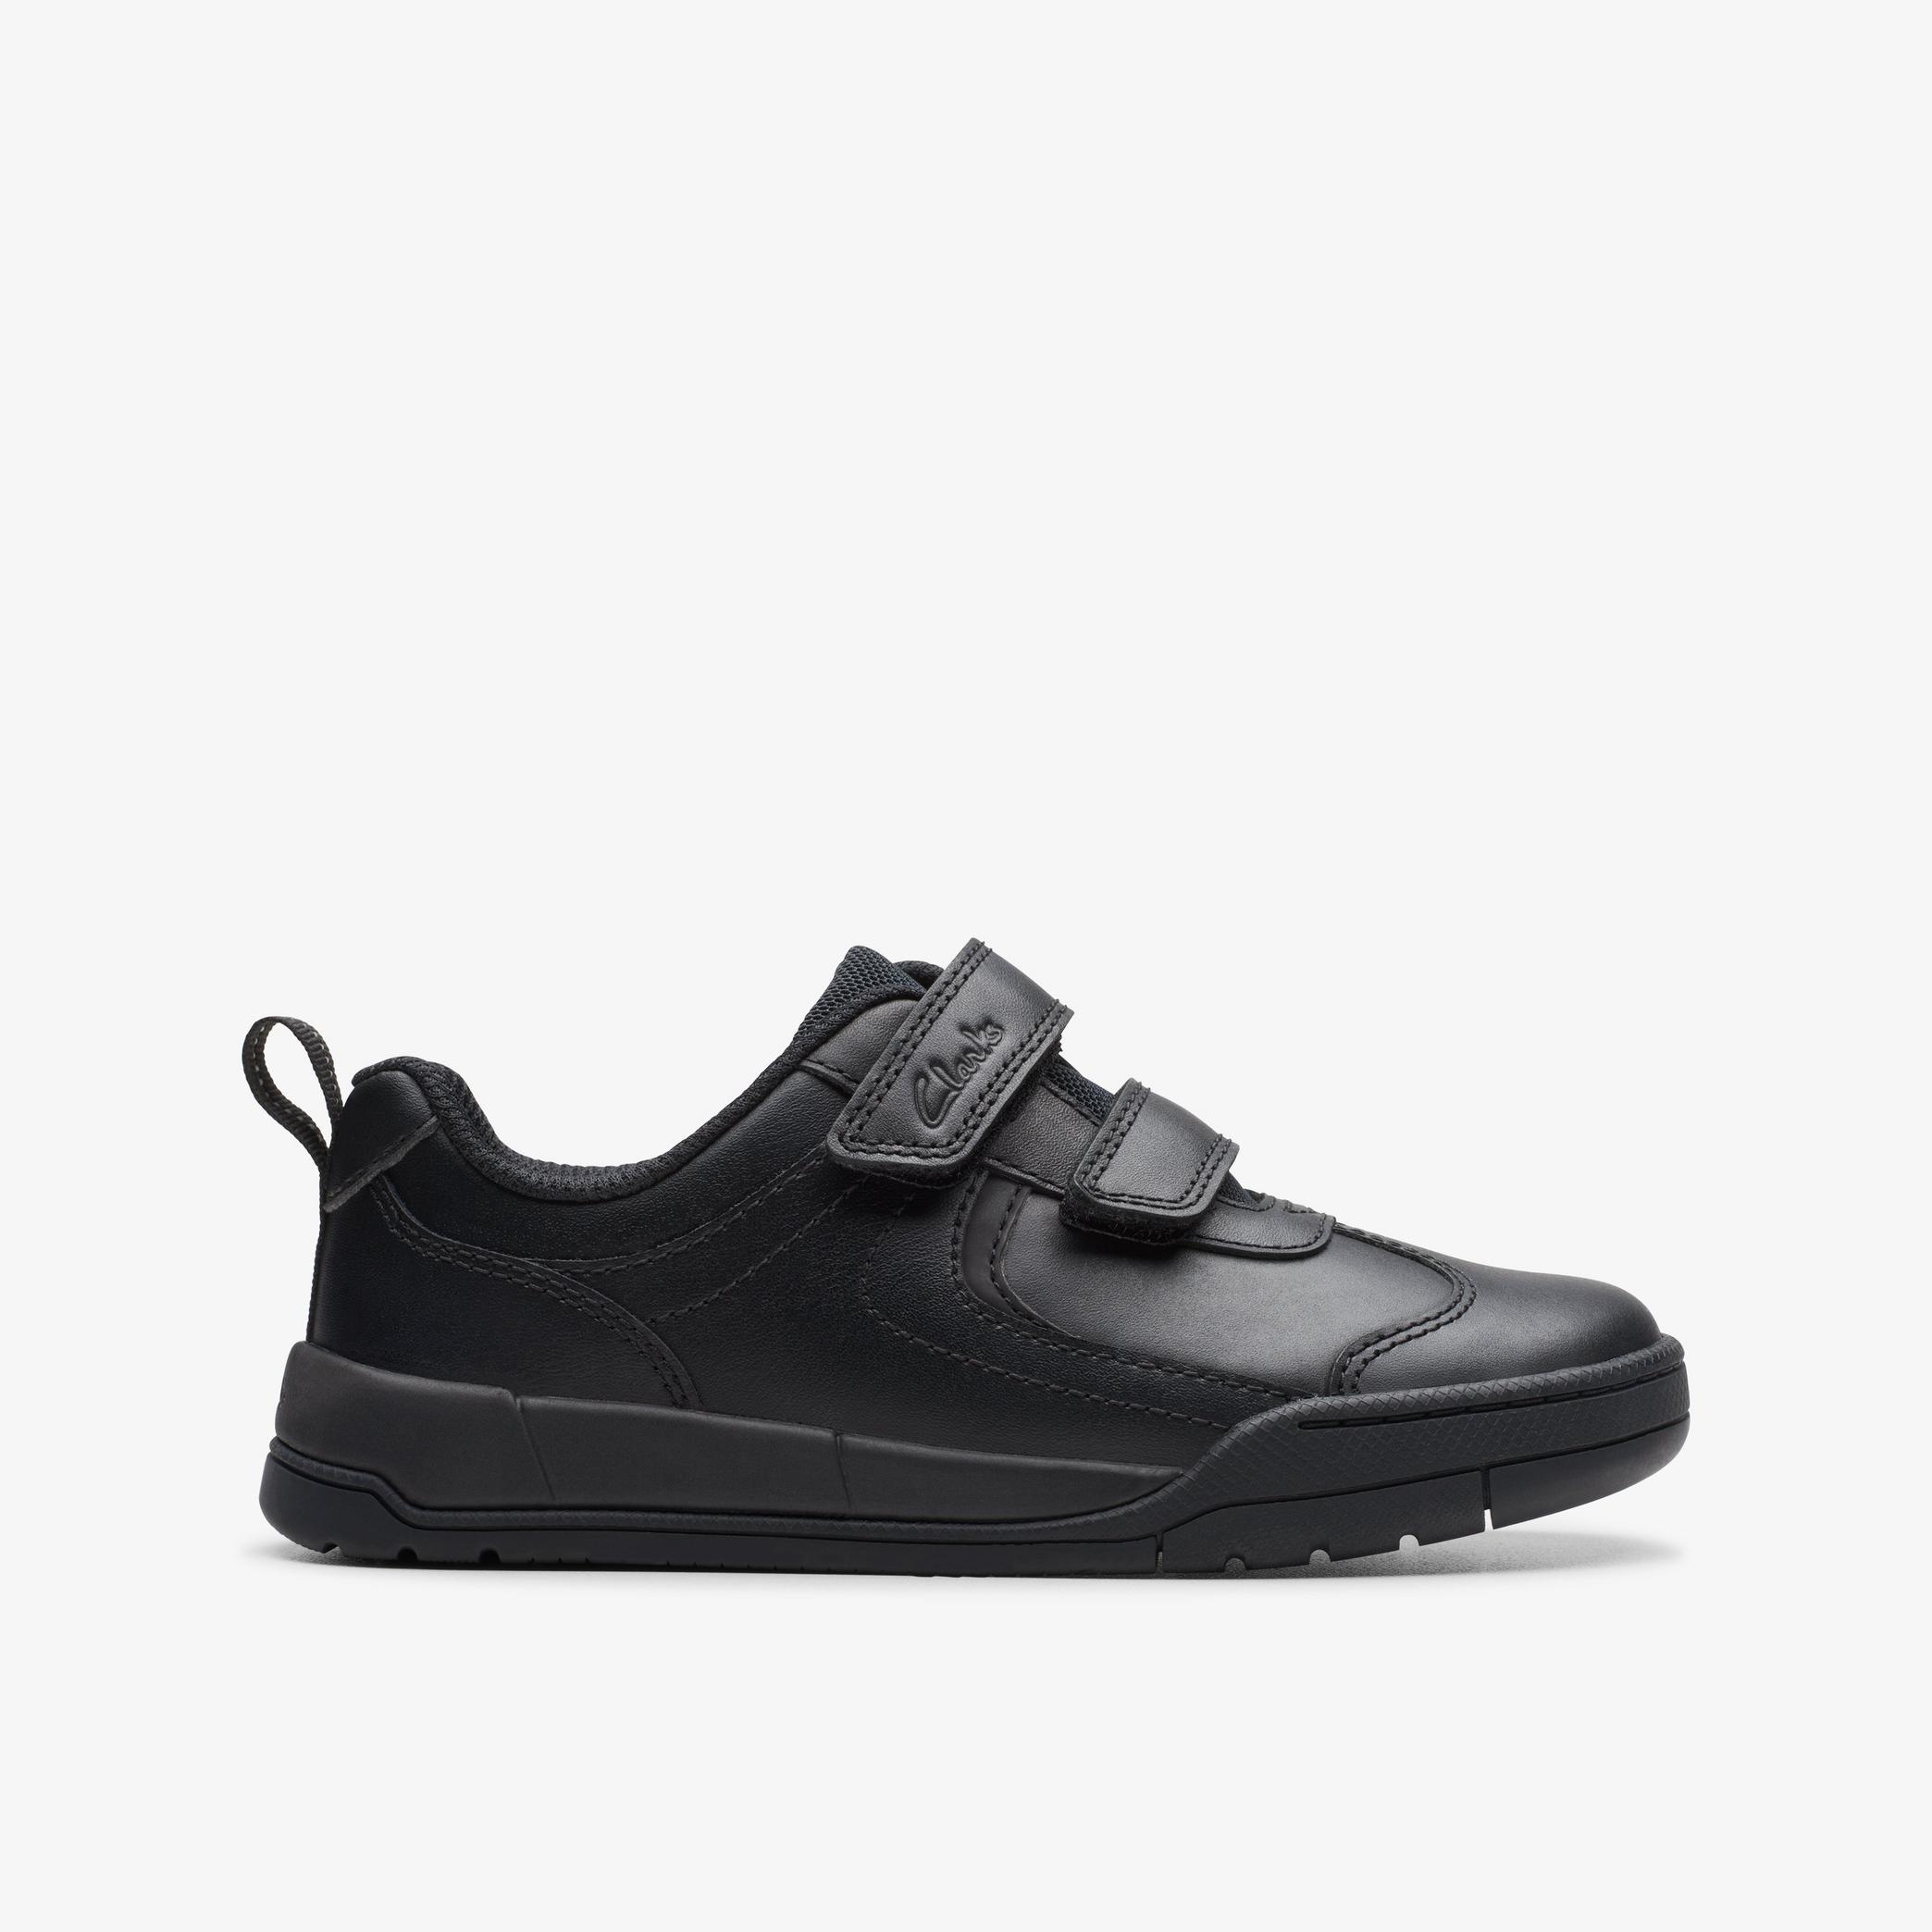 Kick Pace Kid Black Leather Shoes, view 1 of 6